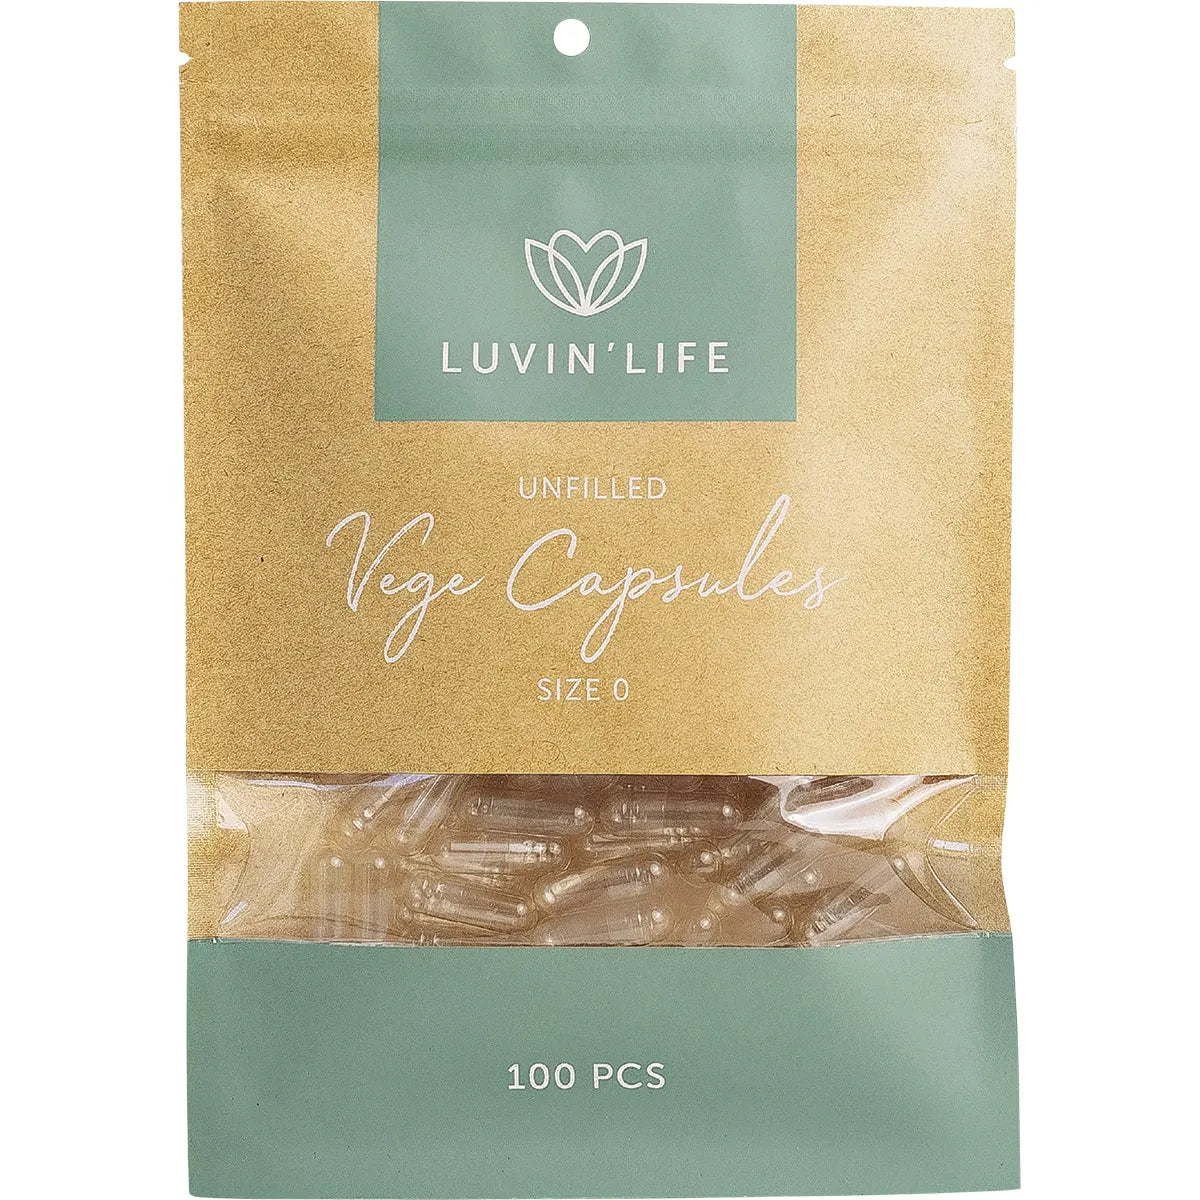 Luvin Life Vege Capsules Unfilled, Size 0 100 Capsules